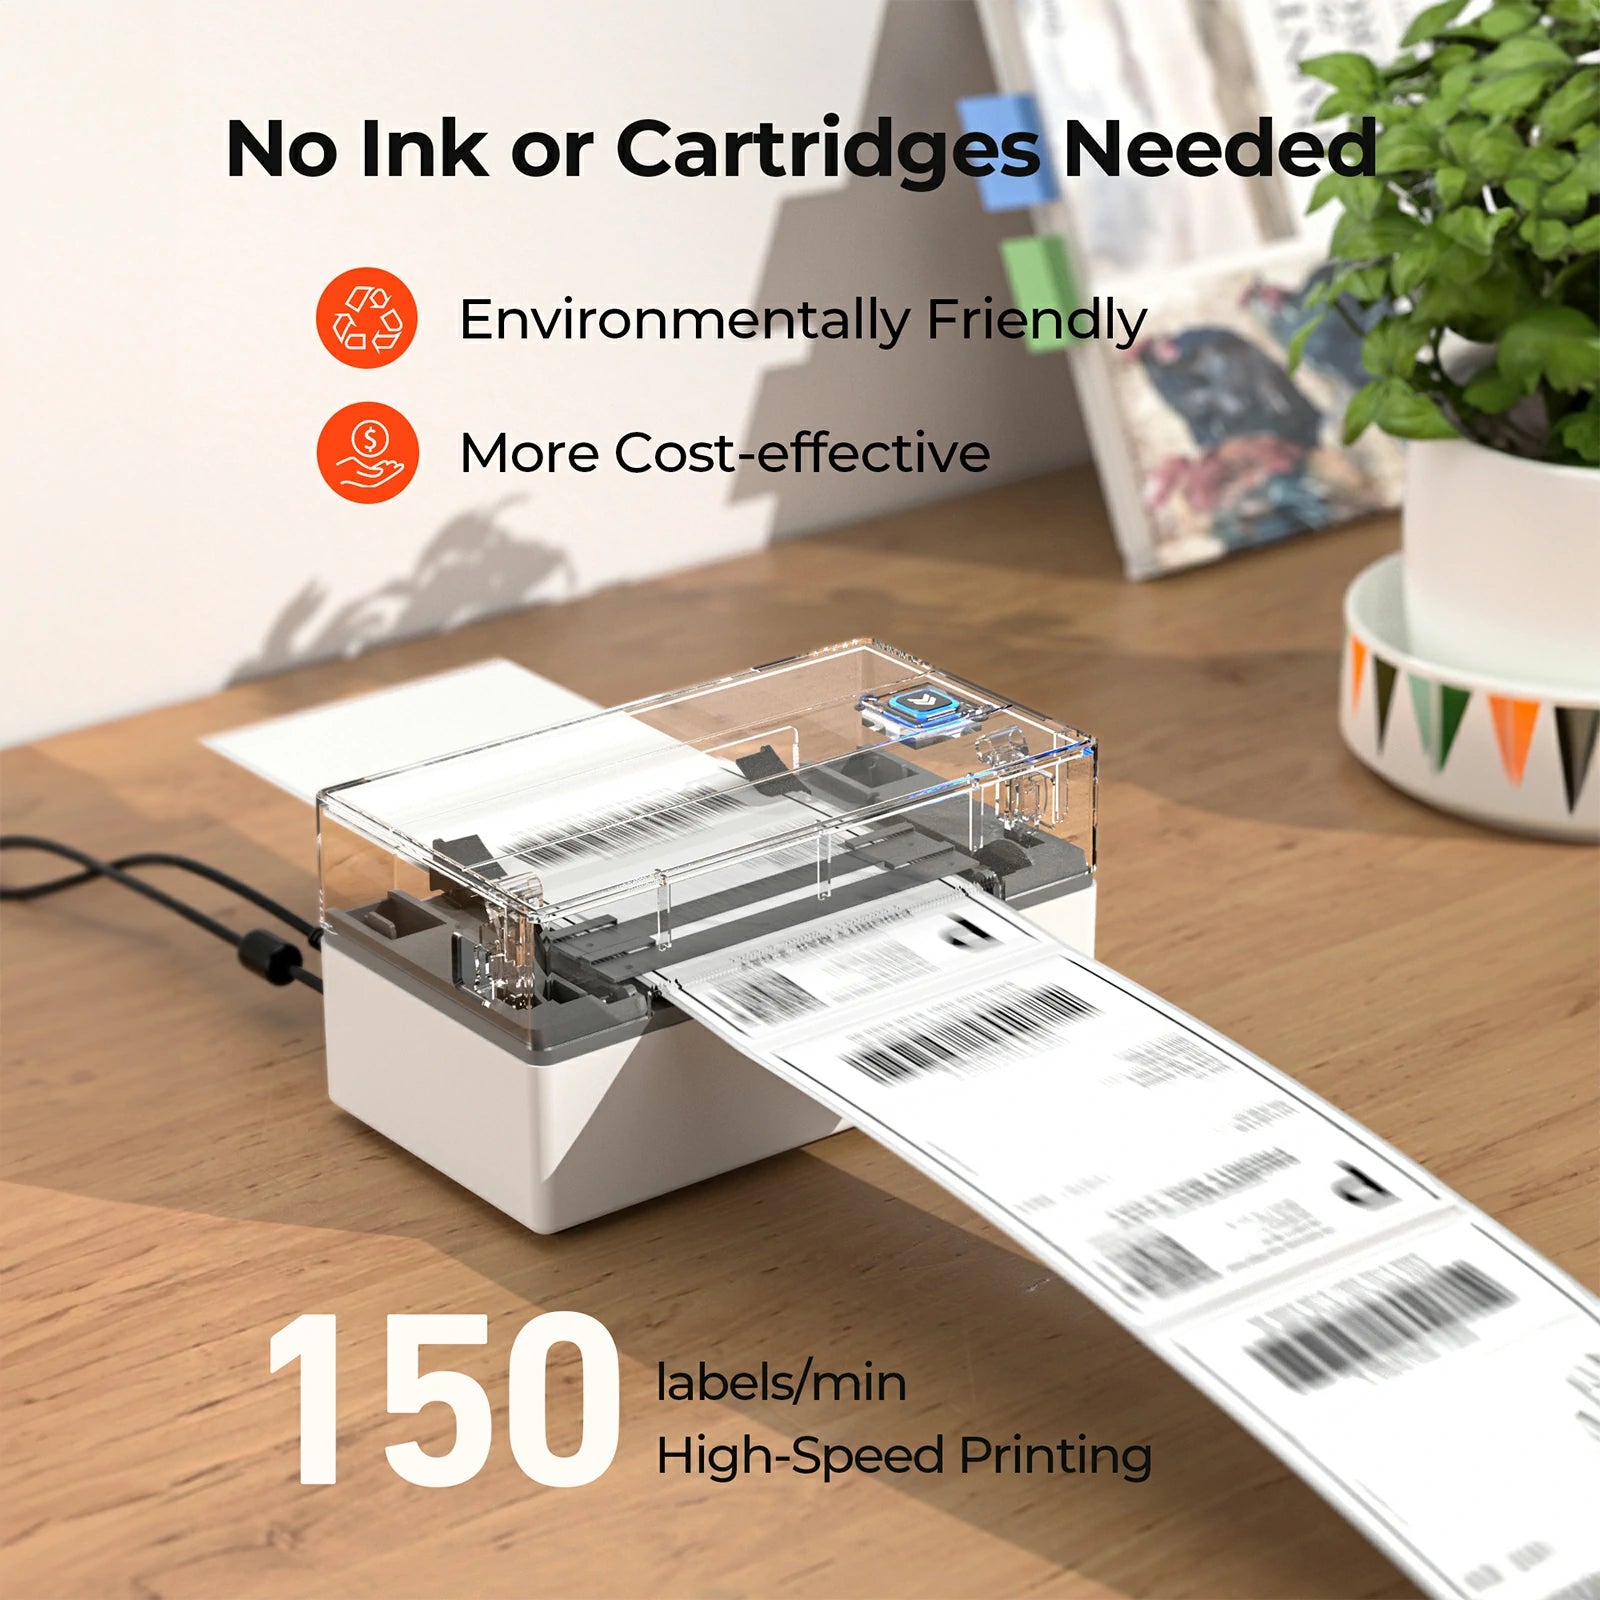 MUNBYN P130 label printer can print shipping labels at the speed of 150 mm per second.